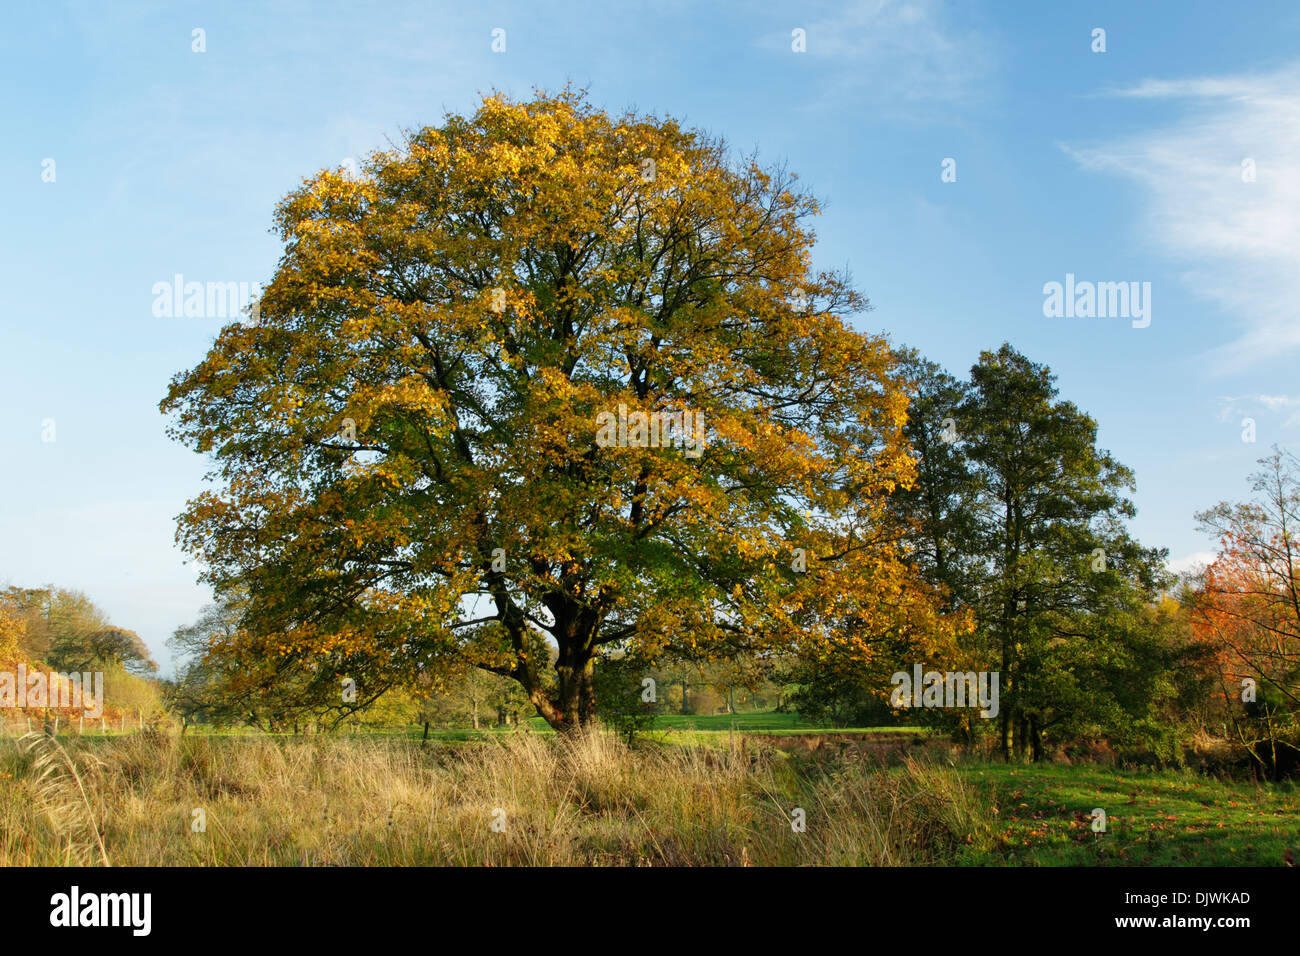 Sycamore tree, latin name Acer pseudoplatanus, showing the first phase of autumn colours Stock Photo